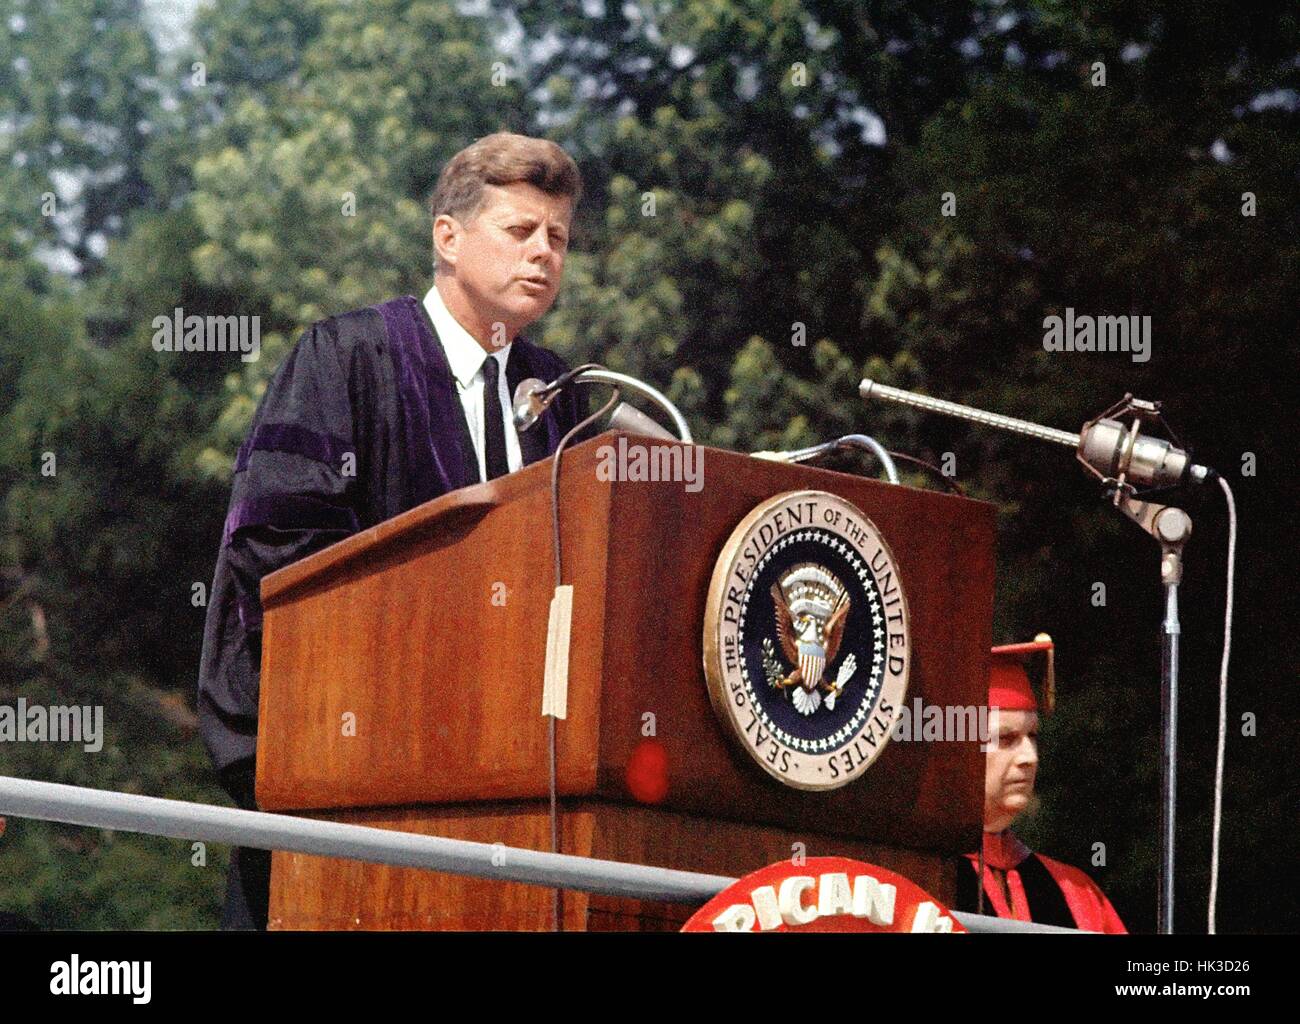 United States President John F. Kennedy speaks at the American University commencement in Washington, D.C. on June 10, 1963. This speech is known as Kennedy's 'Pax Americana' speech, where he outlined his vision for world peace. Stock Photo